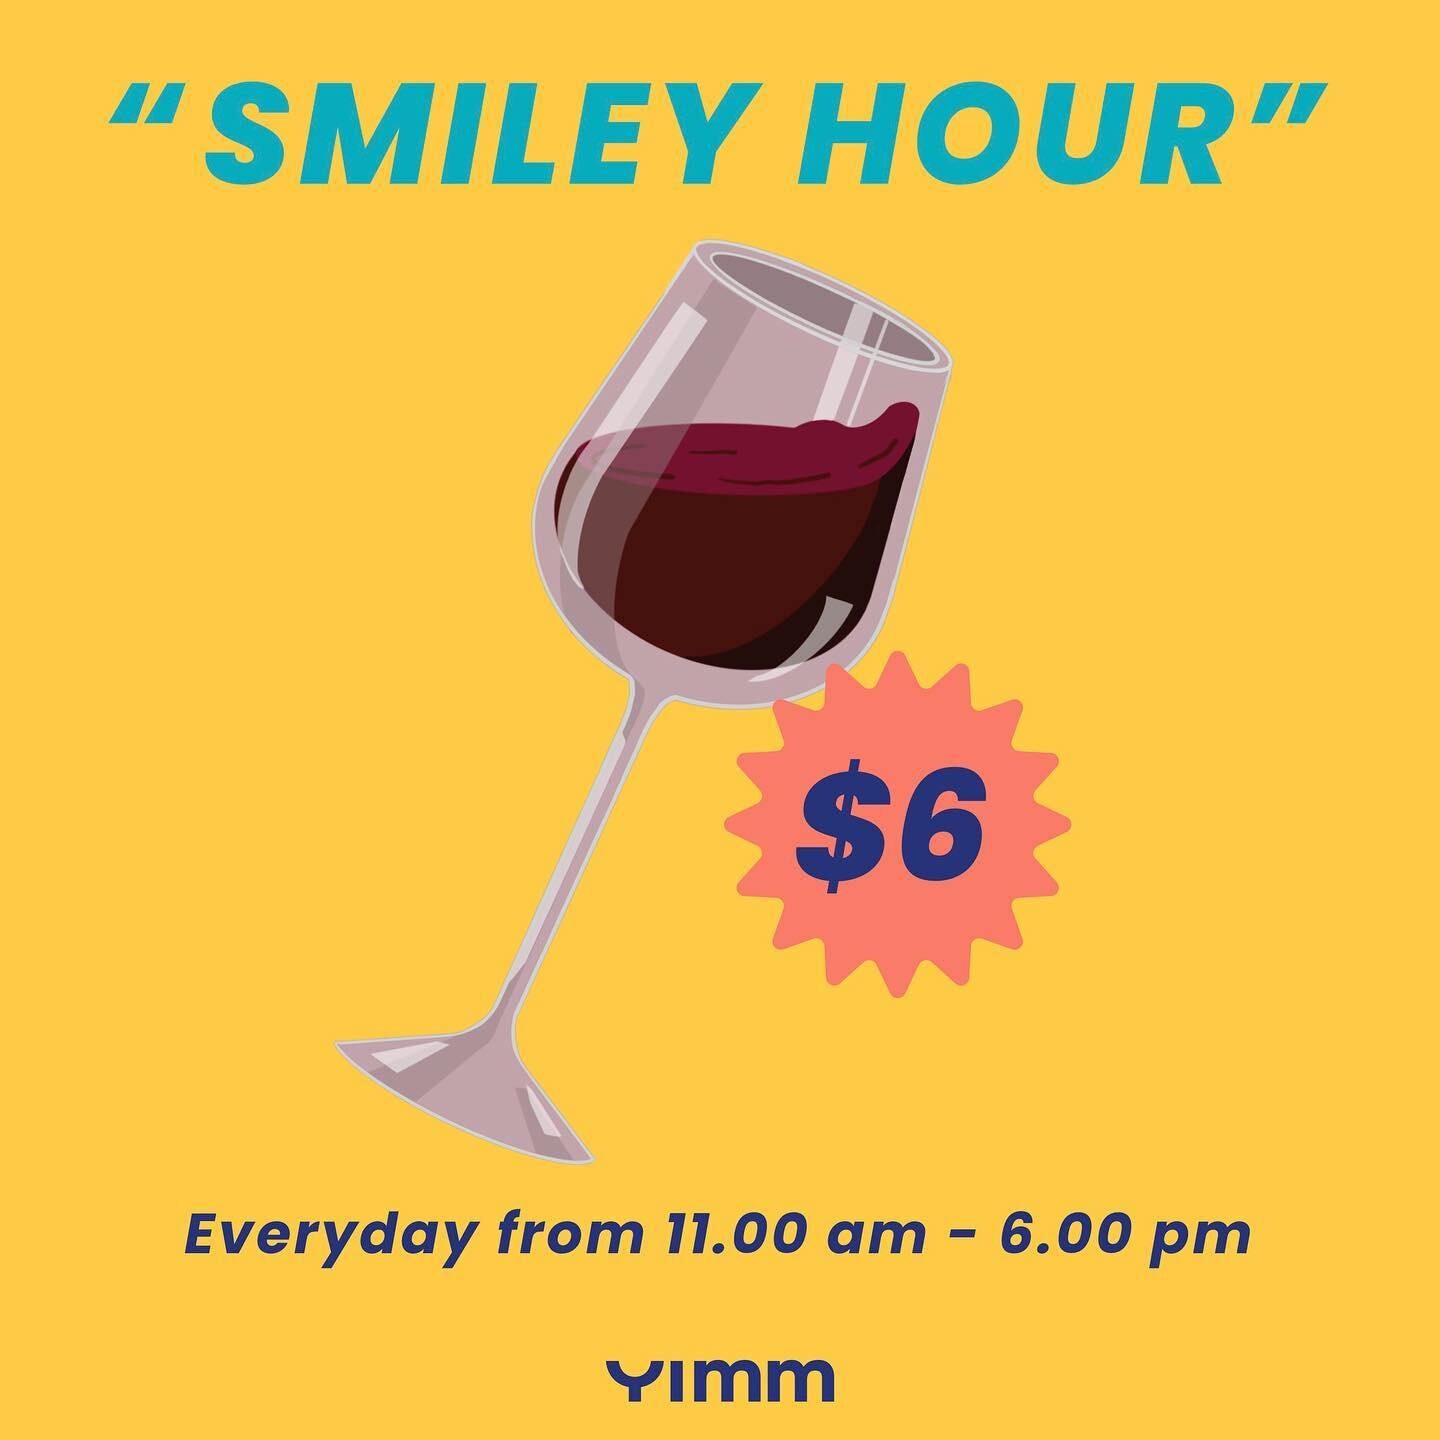 House Wine only $6 🍷 🤩 
Dine-in only 
Reservation call 510 250 9678